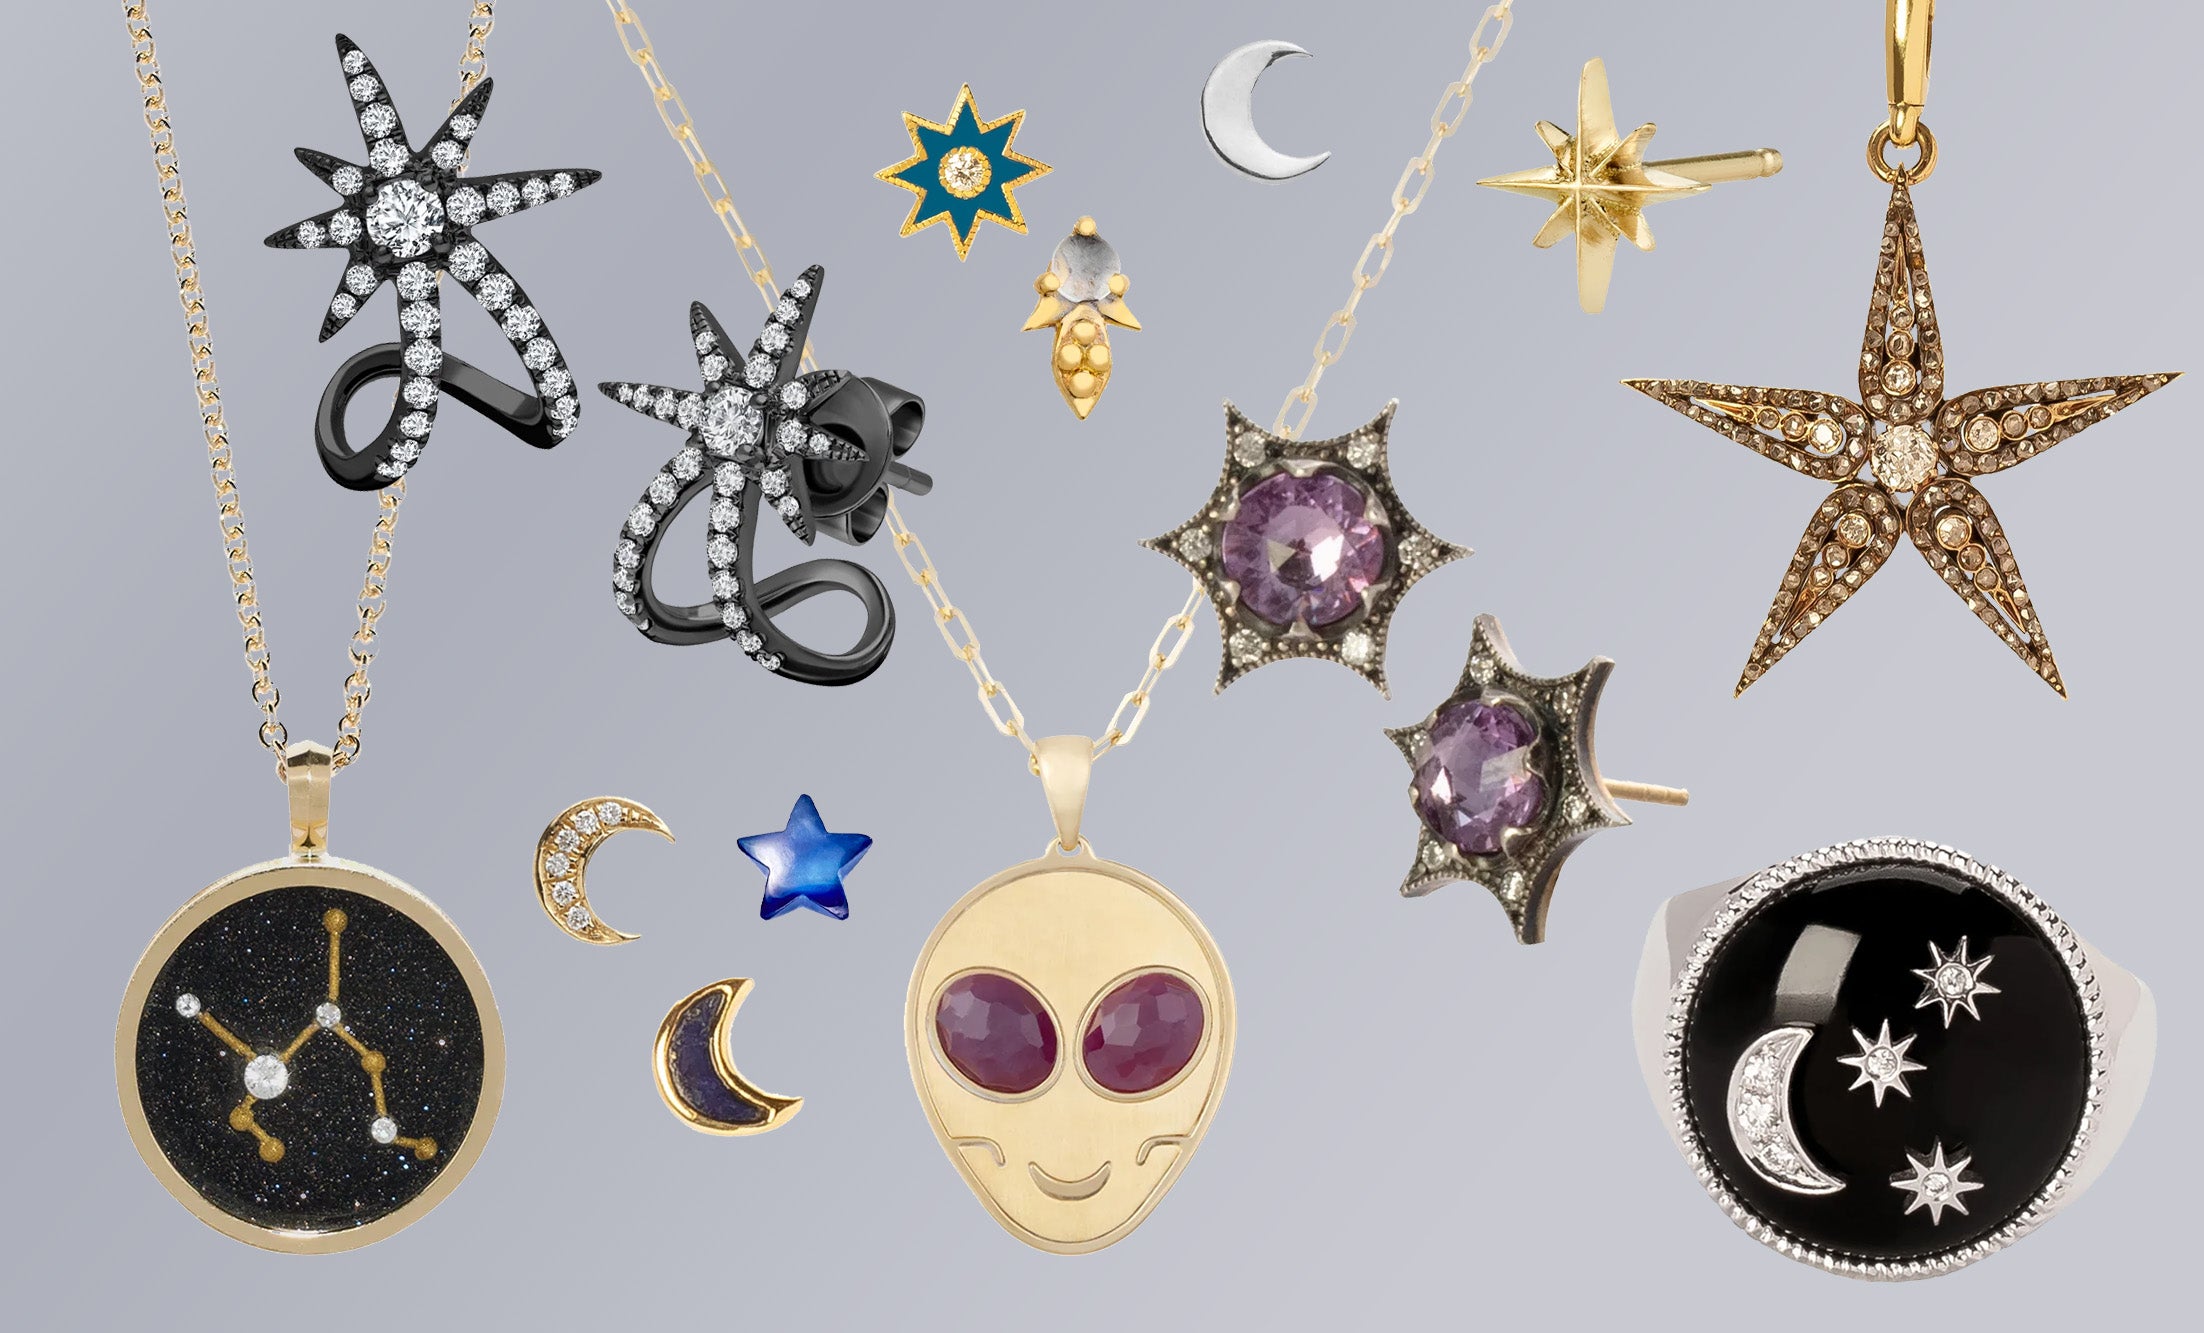 Broken English Jewelry - Cosmic Crush - shop out of this world earrings, bracelets, rings, and necklaces including aliens, stars, spaceships and more